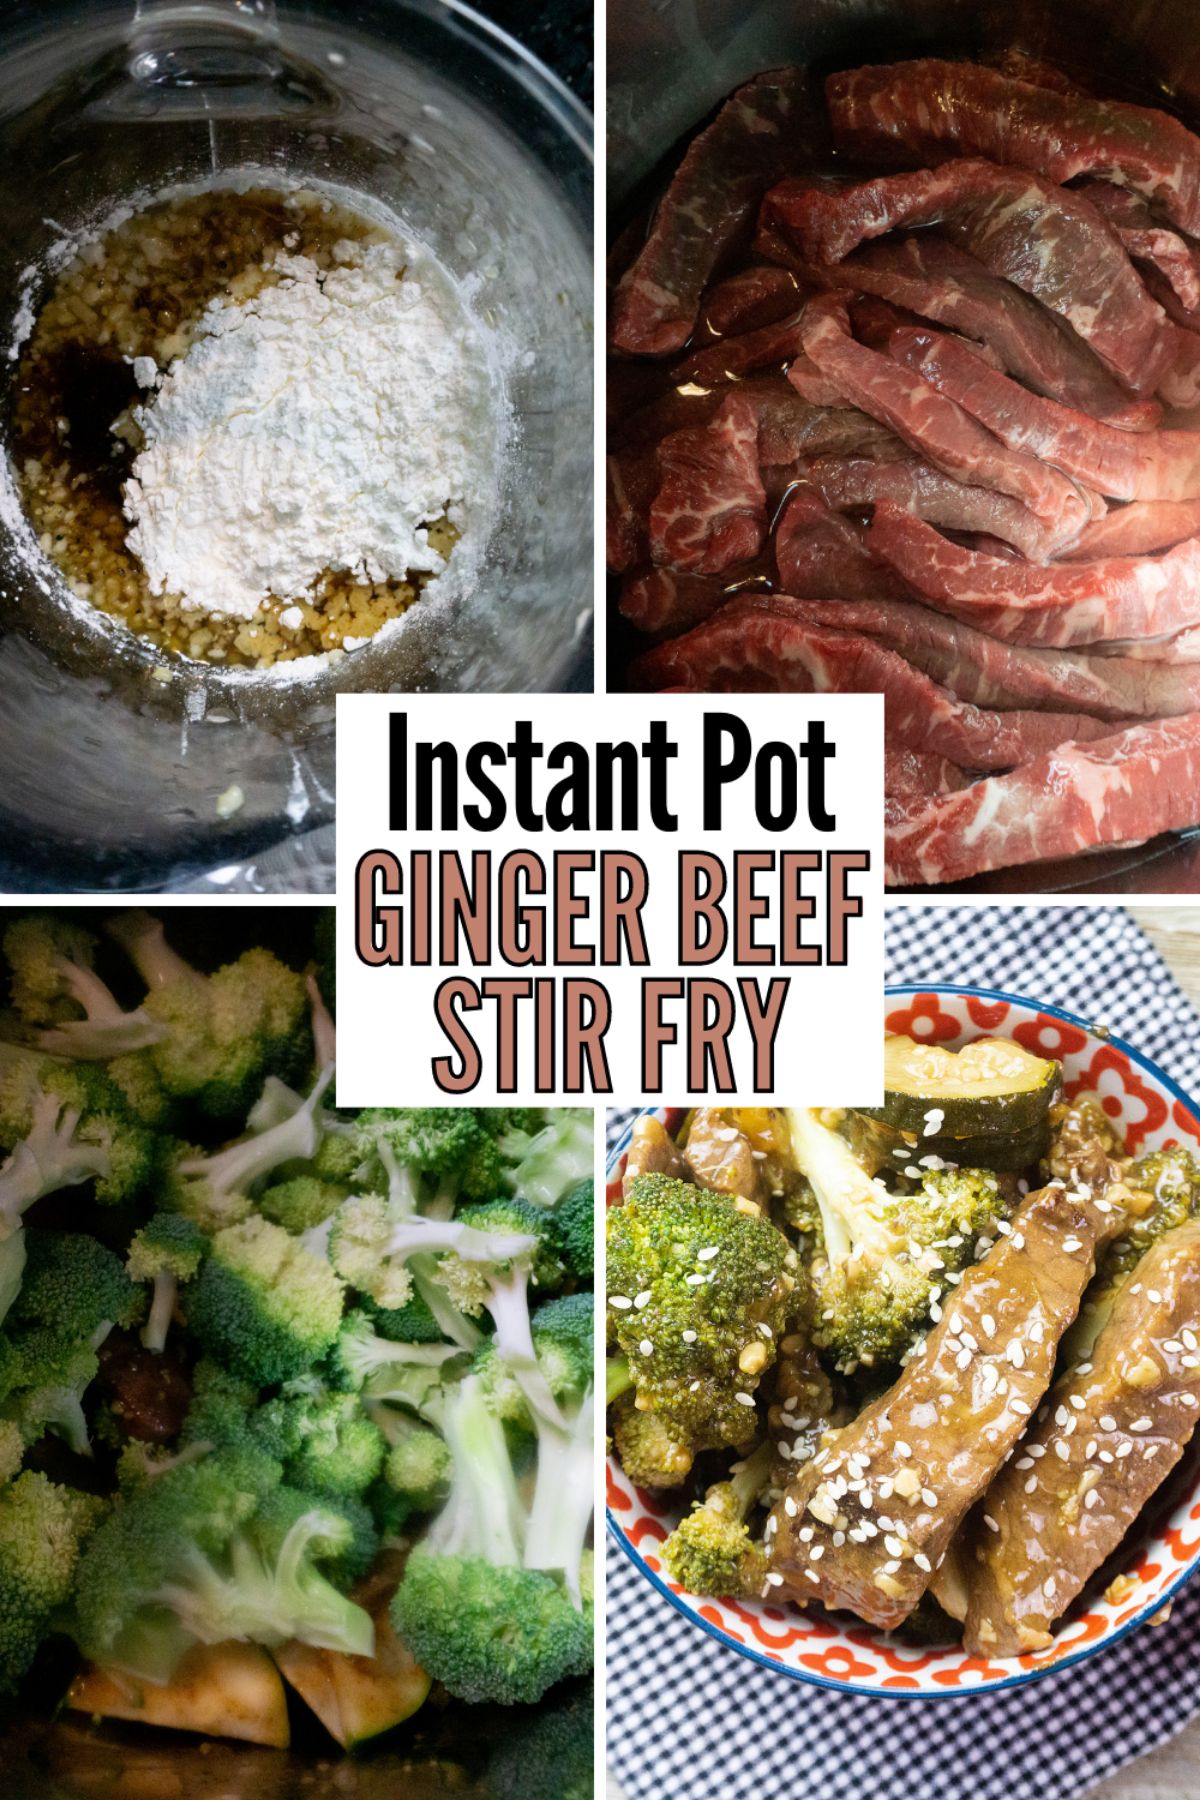 Instant Pot Beef and Broccoli is a delicious beef stir fry recipe that cooks up quickly in the Instant Pot. Your family will love it! #instantpot #pressurecooker #stiryfry #gingerbeef #beefandbroccoli via @wondermomwannab